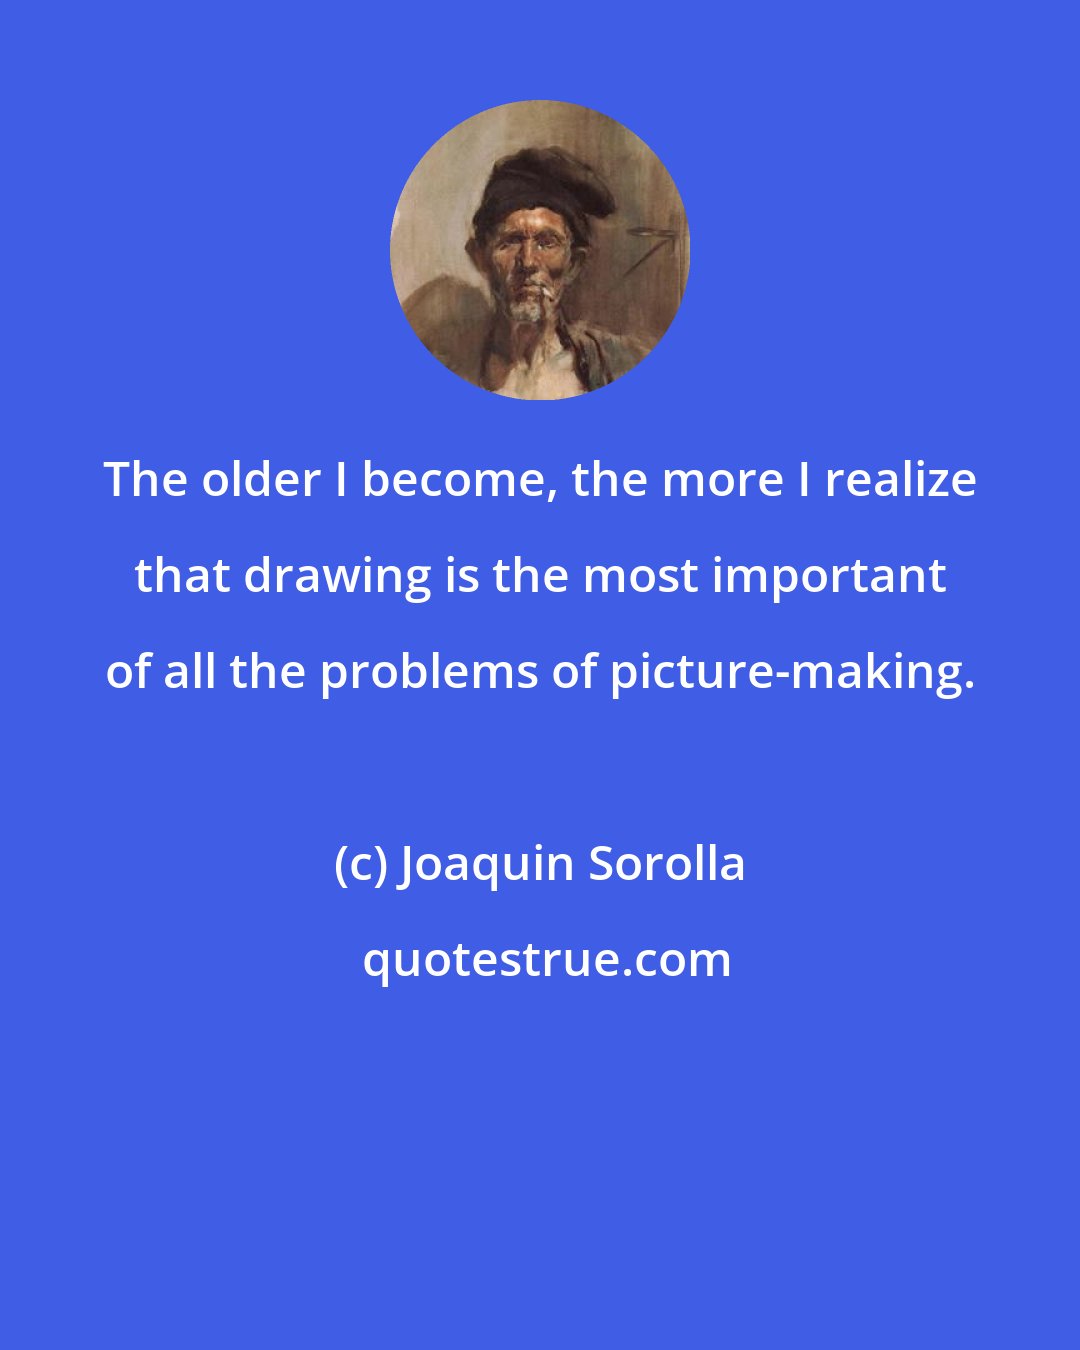 Joaquin Sorolla: The older I become, the more I realize that drawing is the most important of all the problems of picture-making.